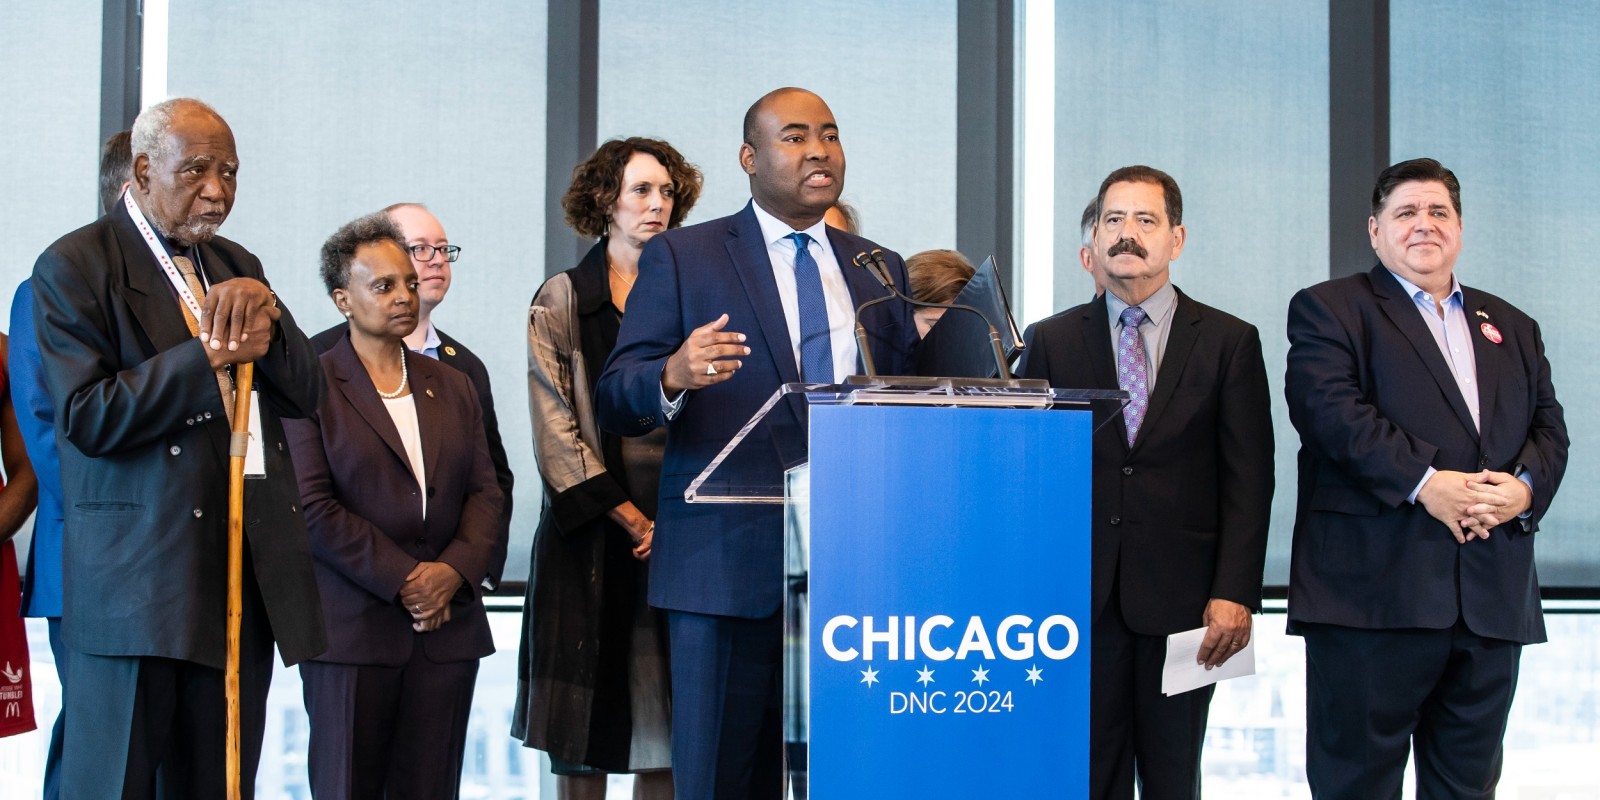 What’s the political significance of Chicago hosting the 2024 DNC